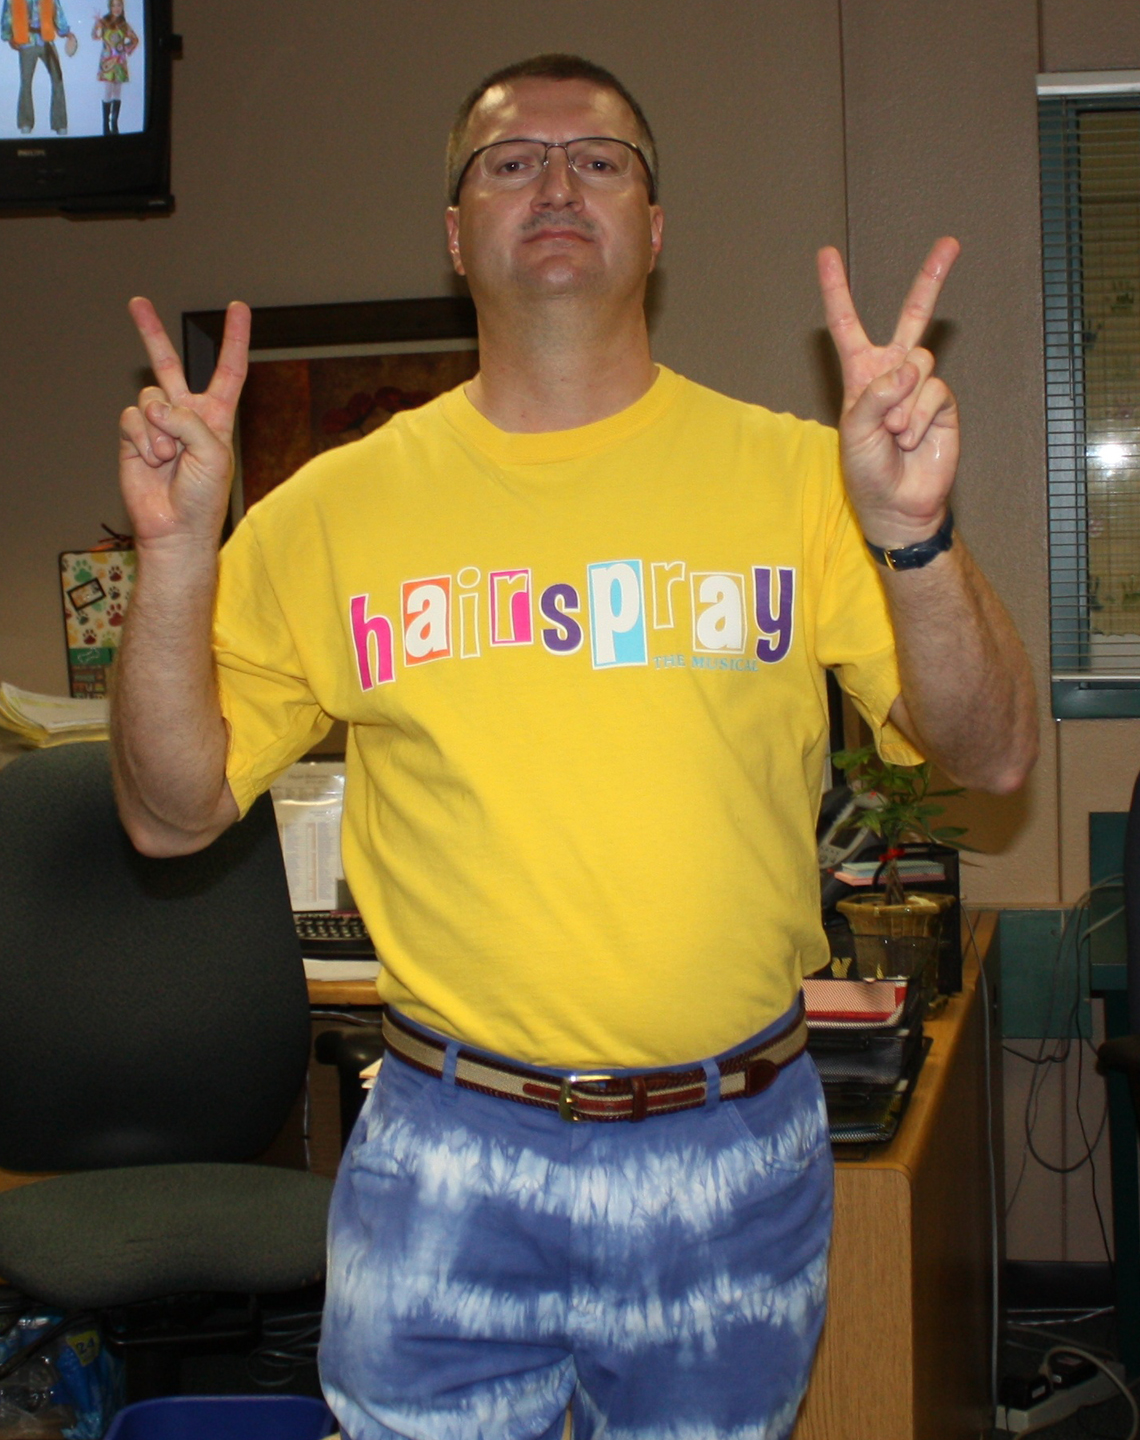 Tim won’t miss an opportunity to show his school spirit. A Hairspray t-shirt and tie-dye pants completed his “Groovy Day” outfit.